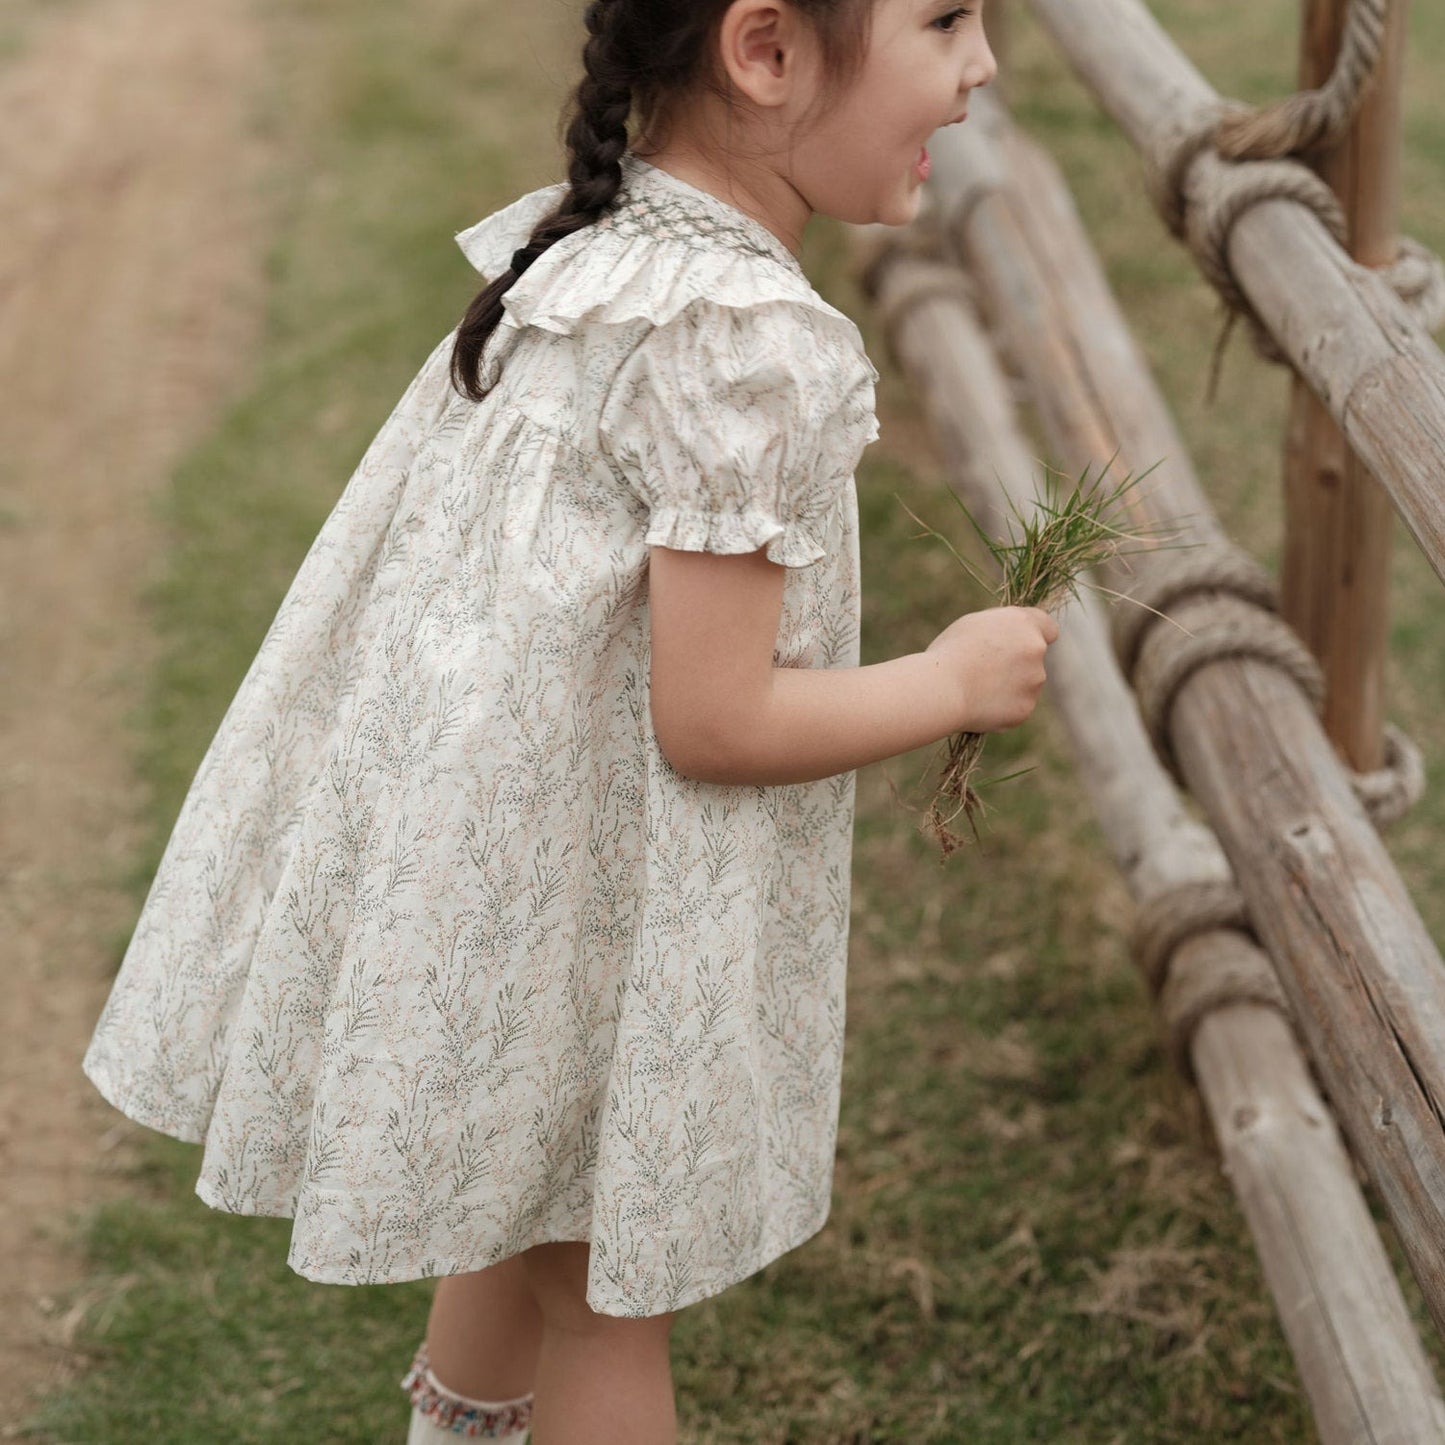 Floral Pattern Smocked Collar Dress,12M to 7T.